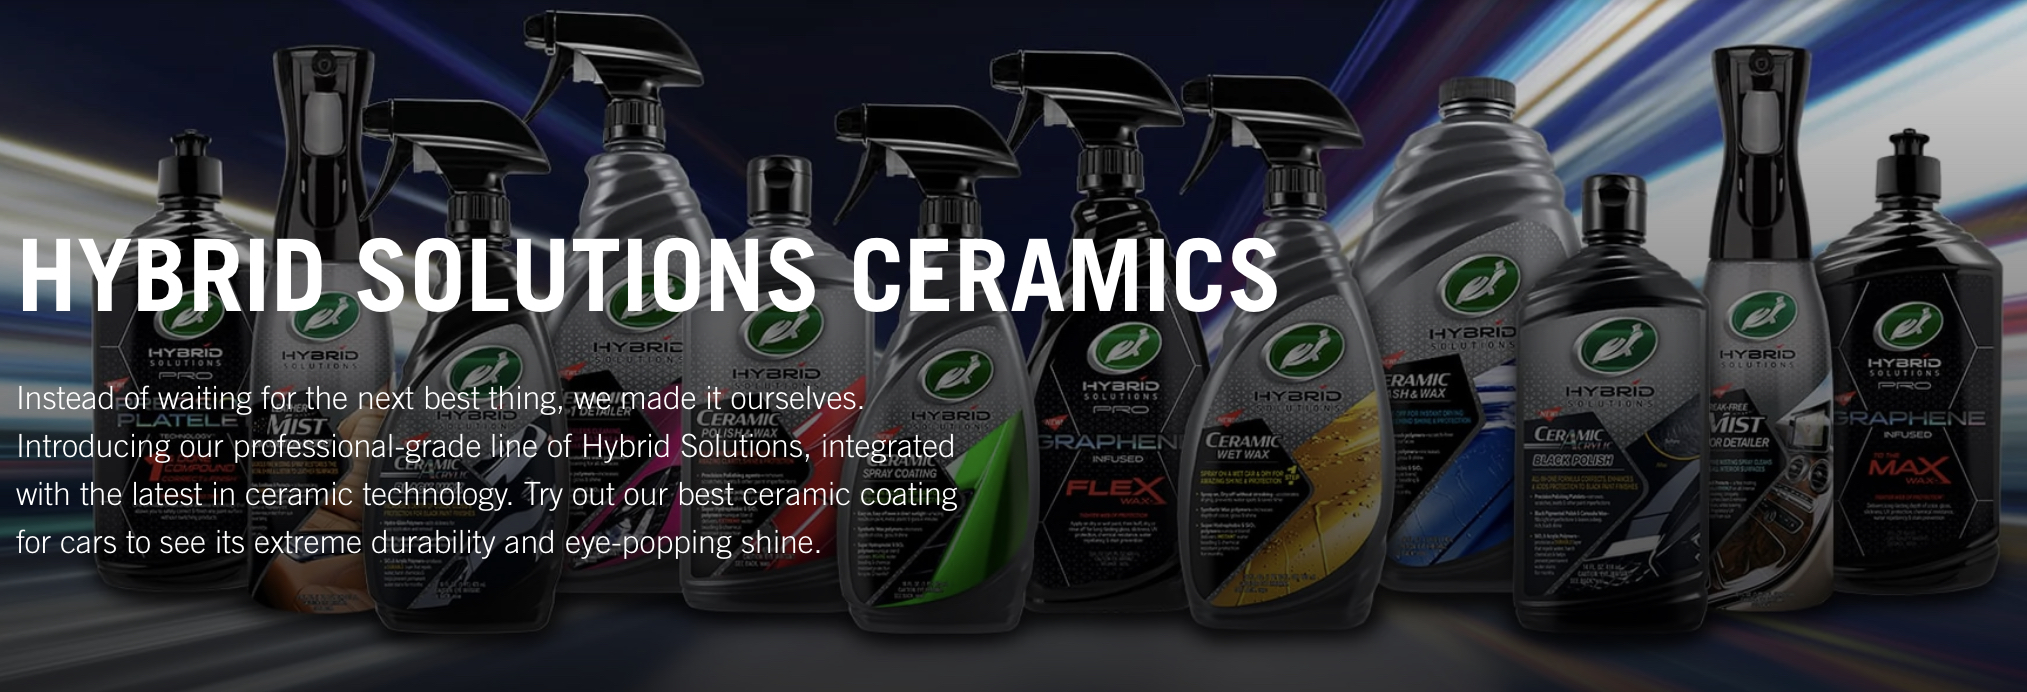 TurtleWax Ceramic Wax - buy direct and save $9.35